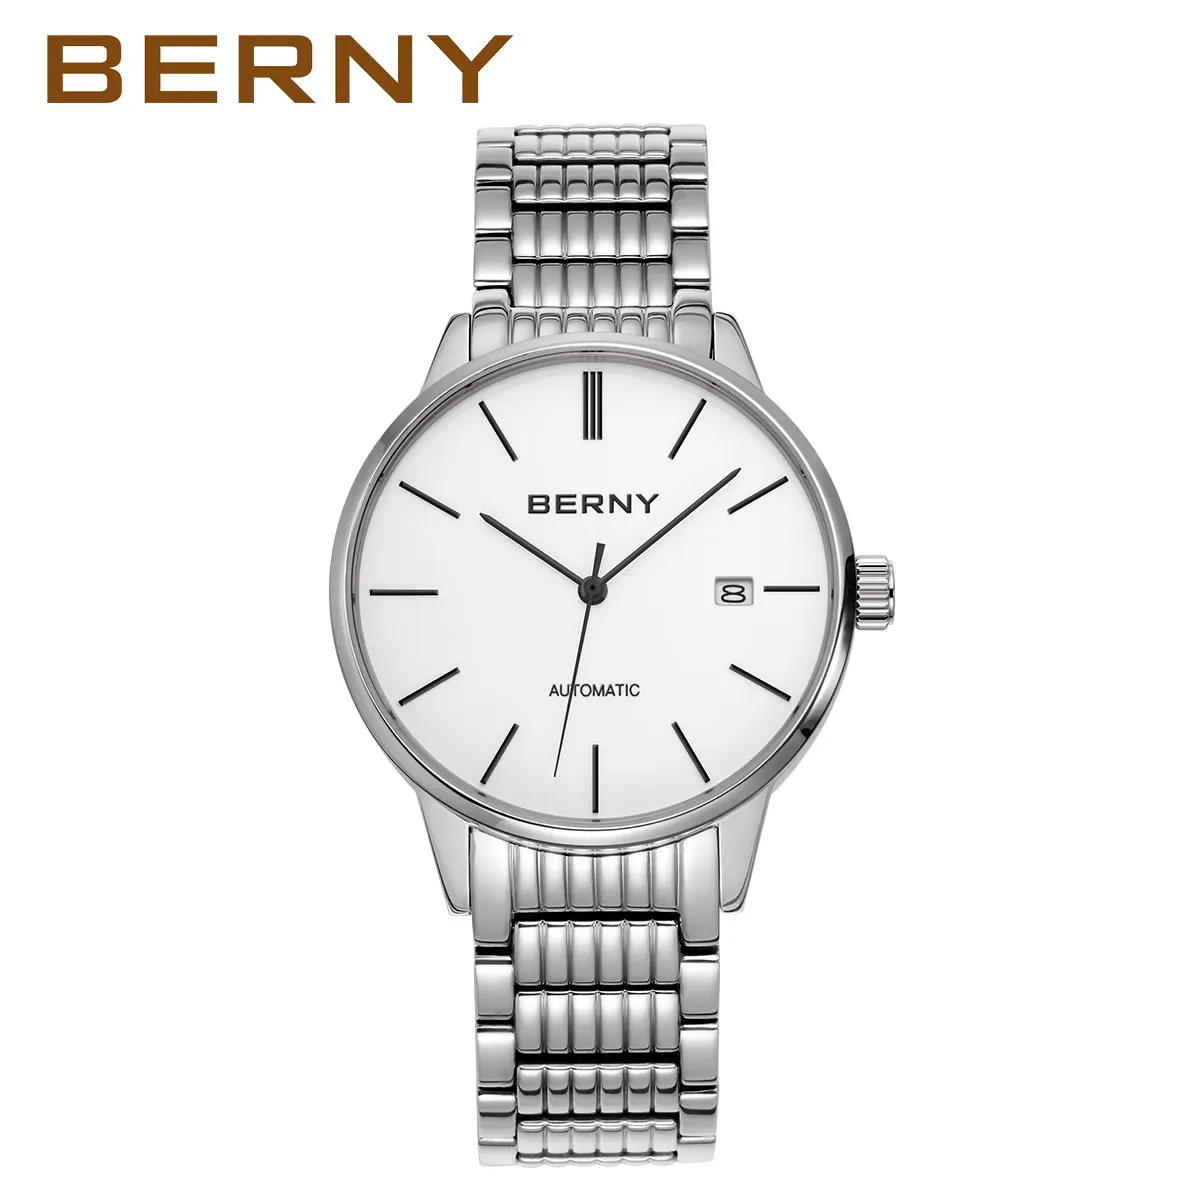 

BERNY Automatic Watch for Men Mechanical Wristwatches Luxury Brand Male Clock Sapphire Stainless Steel 38mm 5ATM Men's Watches